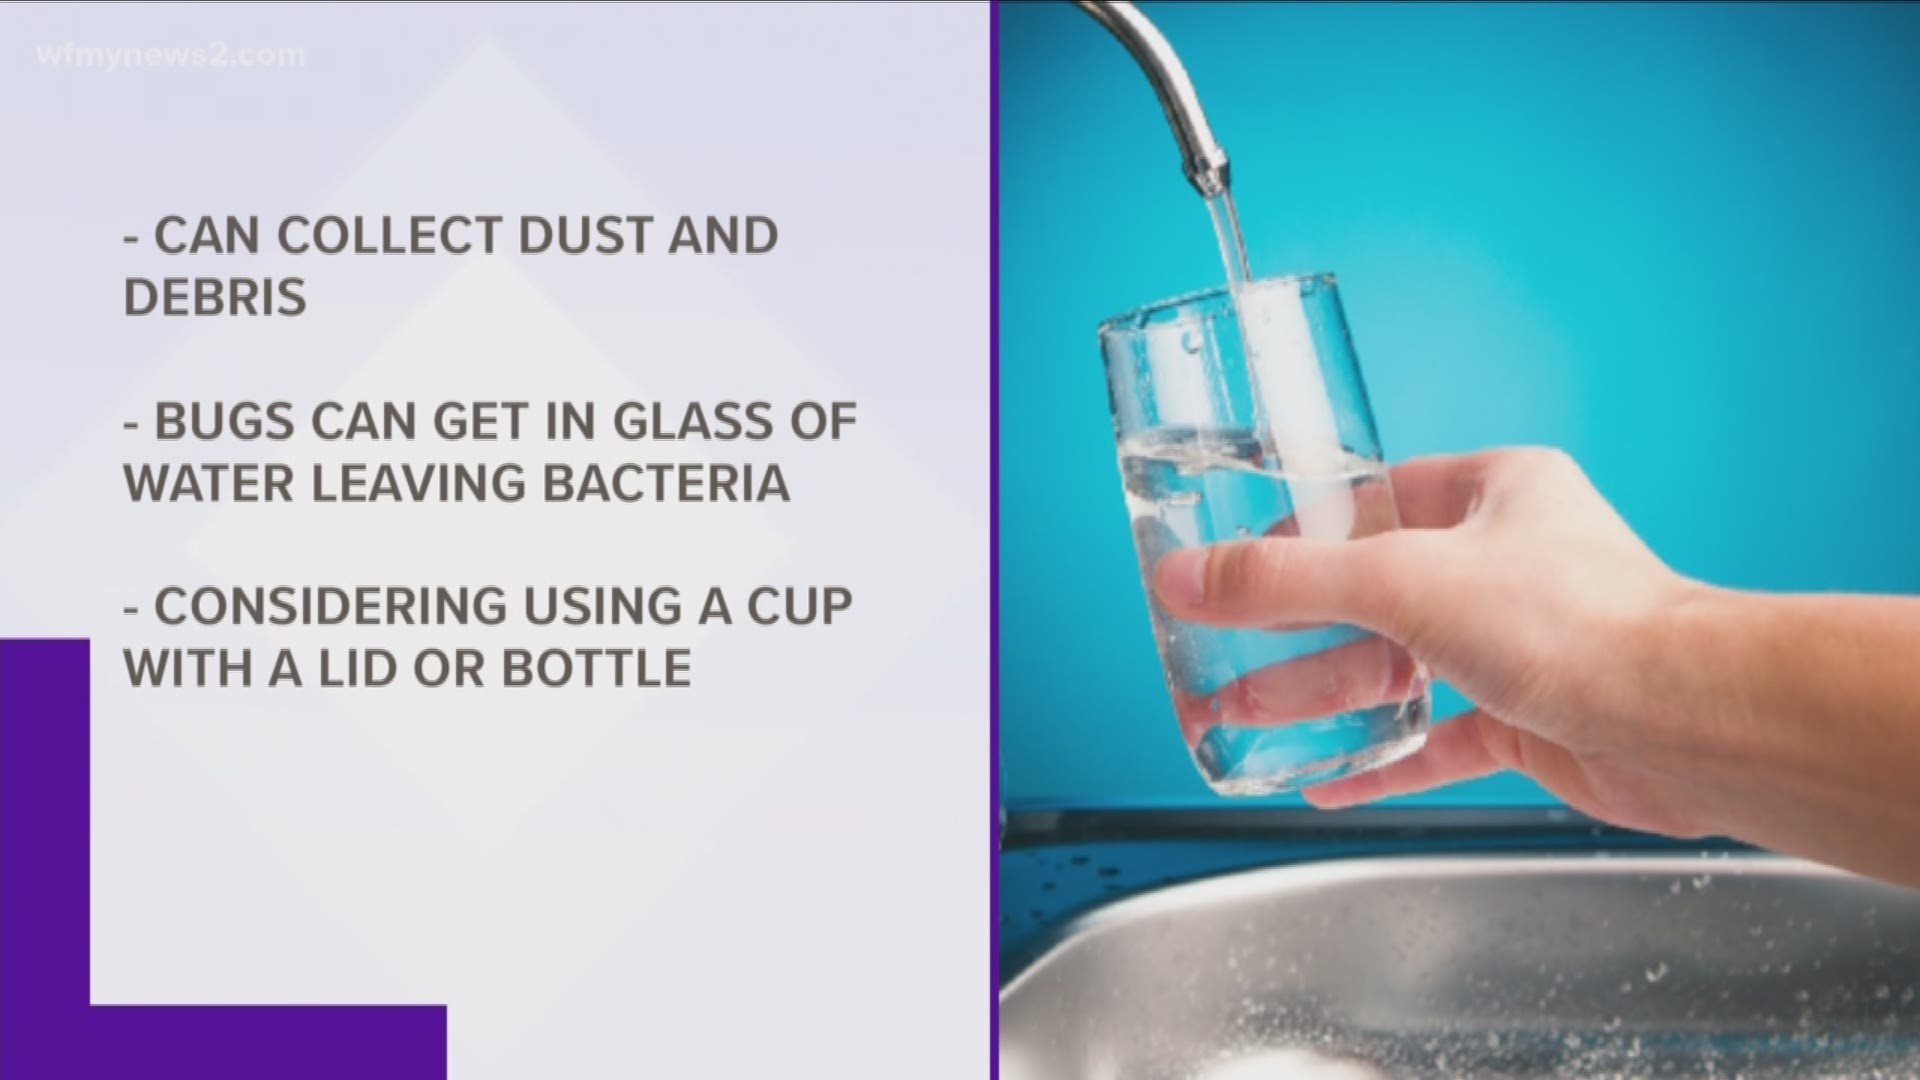 New research says that dust and germs can collect in the cup in just a few hours.